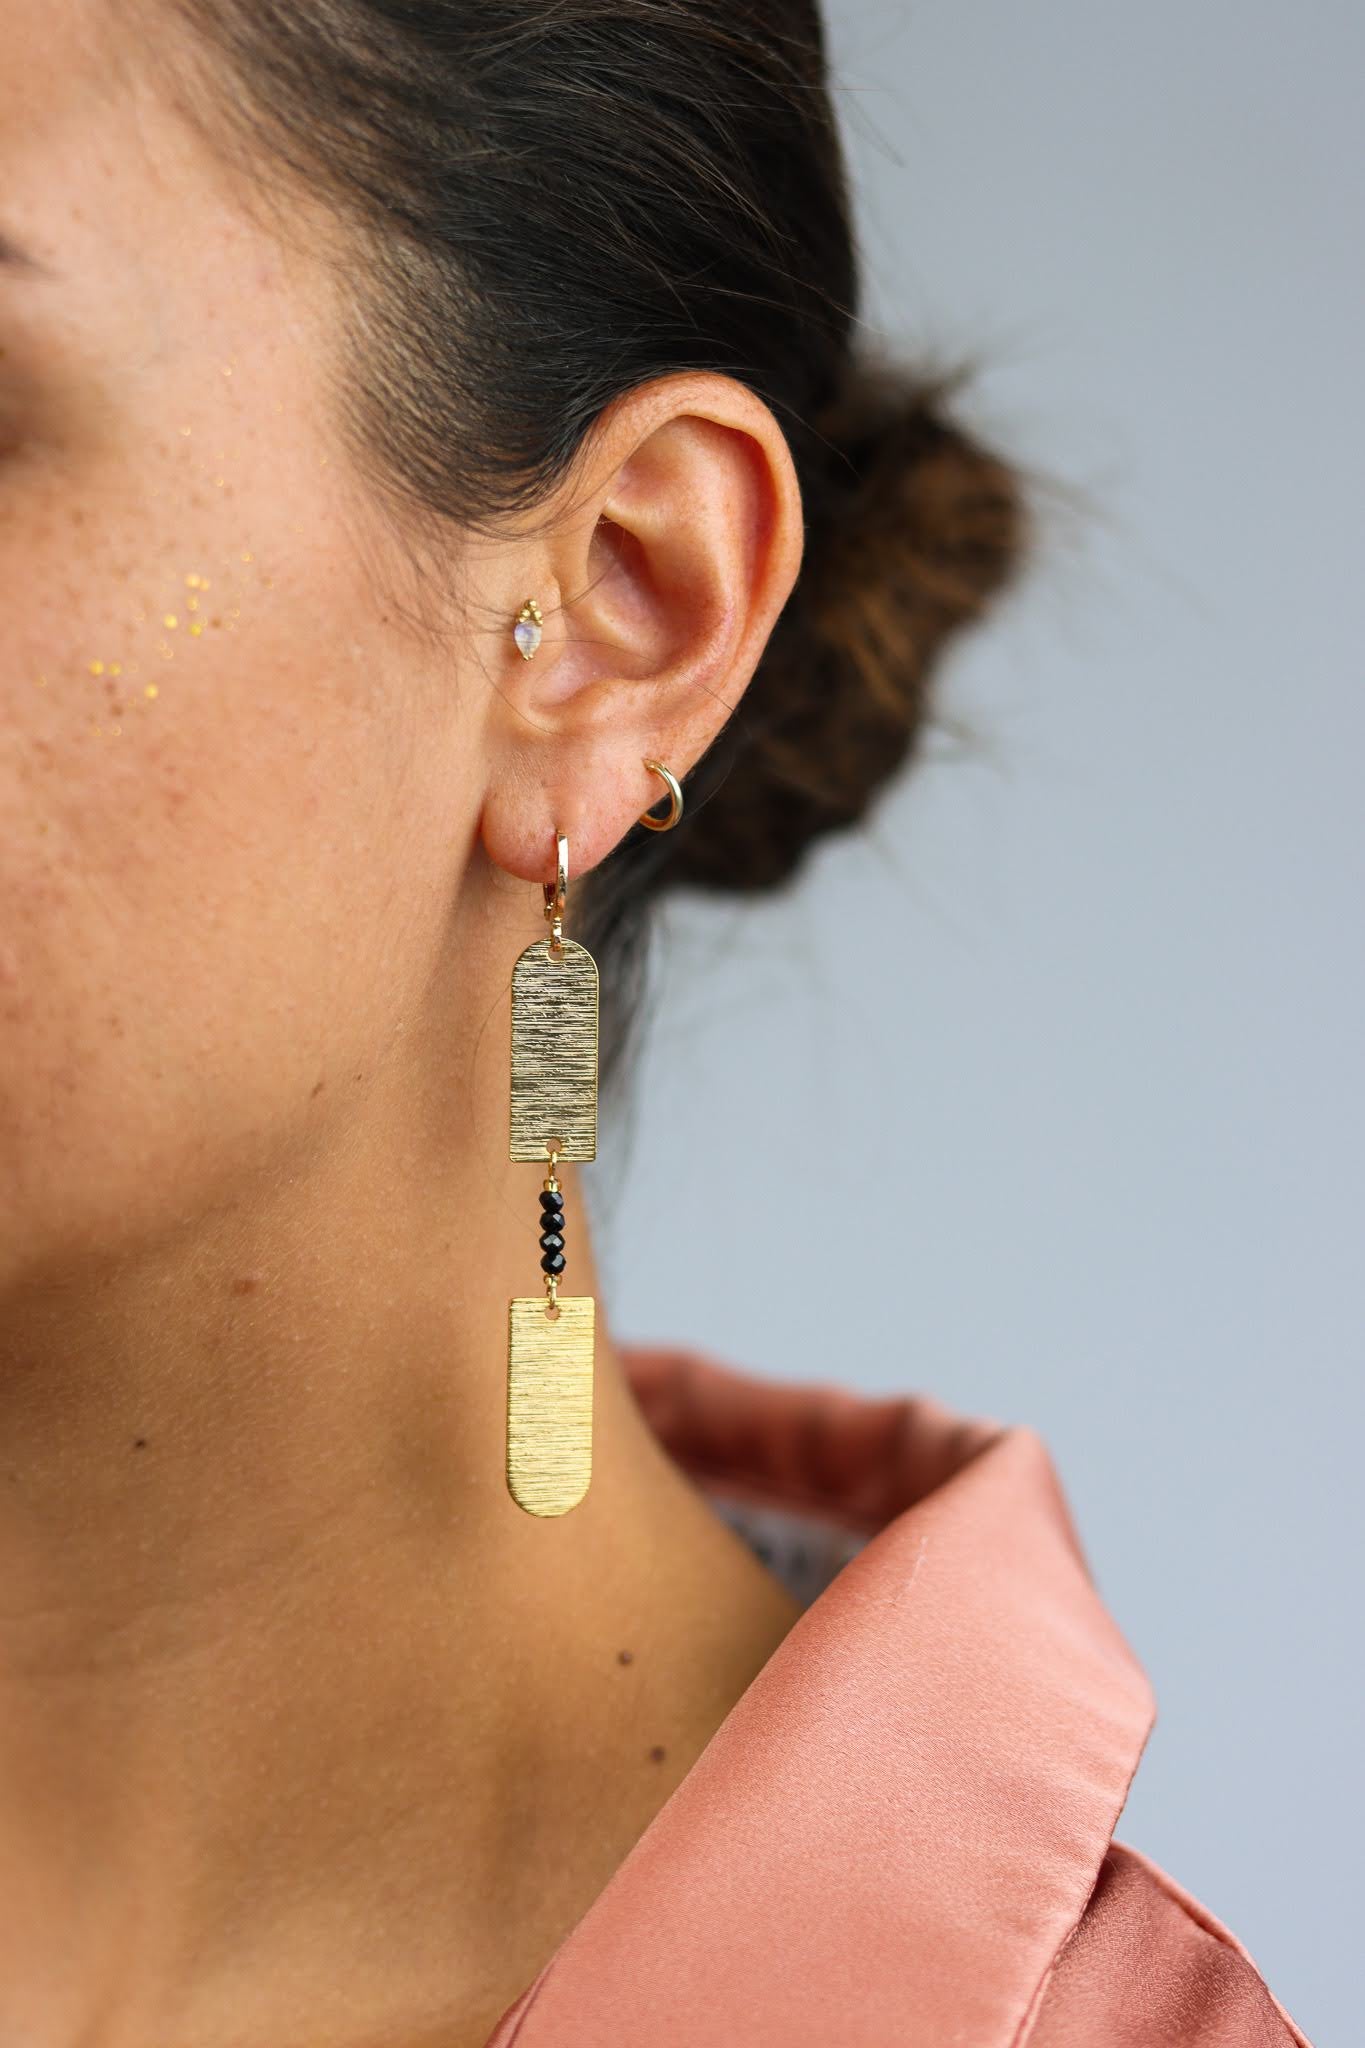 Stay Gold by Mme Bovary Egyptian Goddess statement earrings with onyx